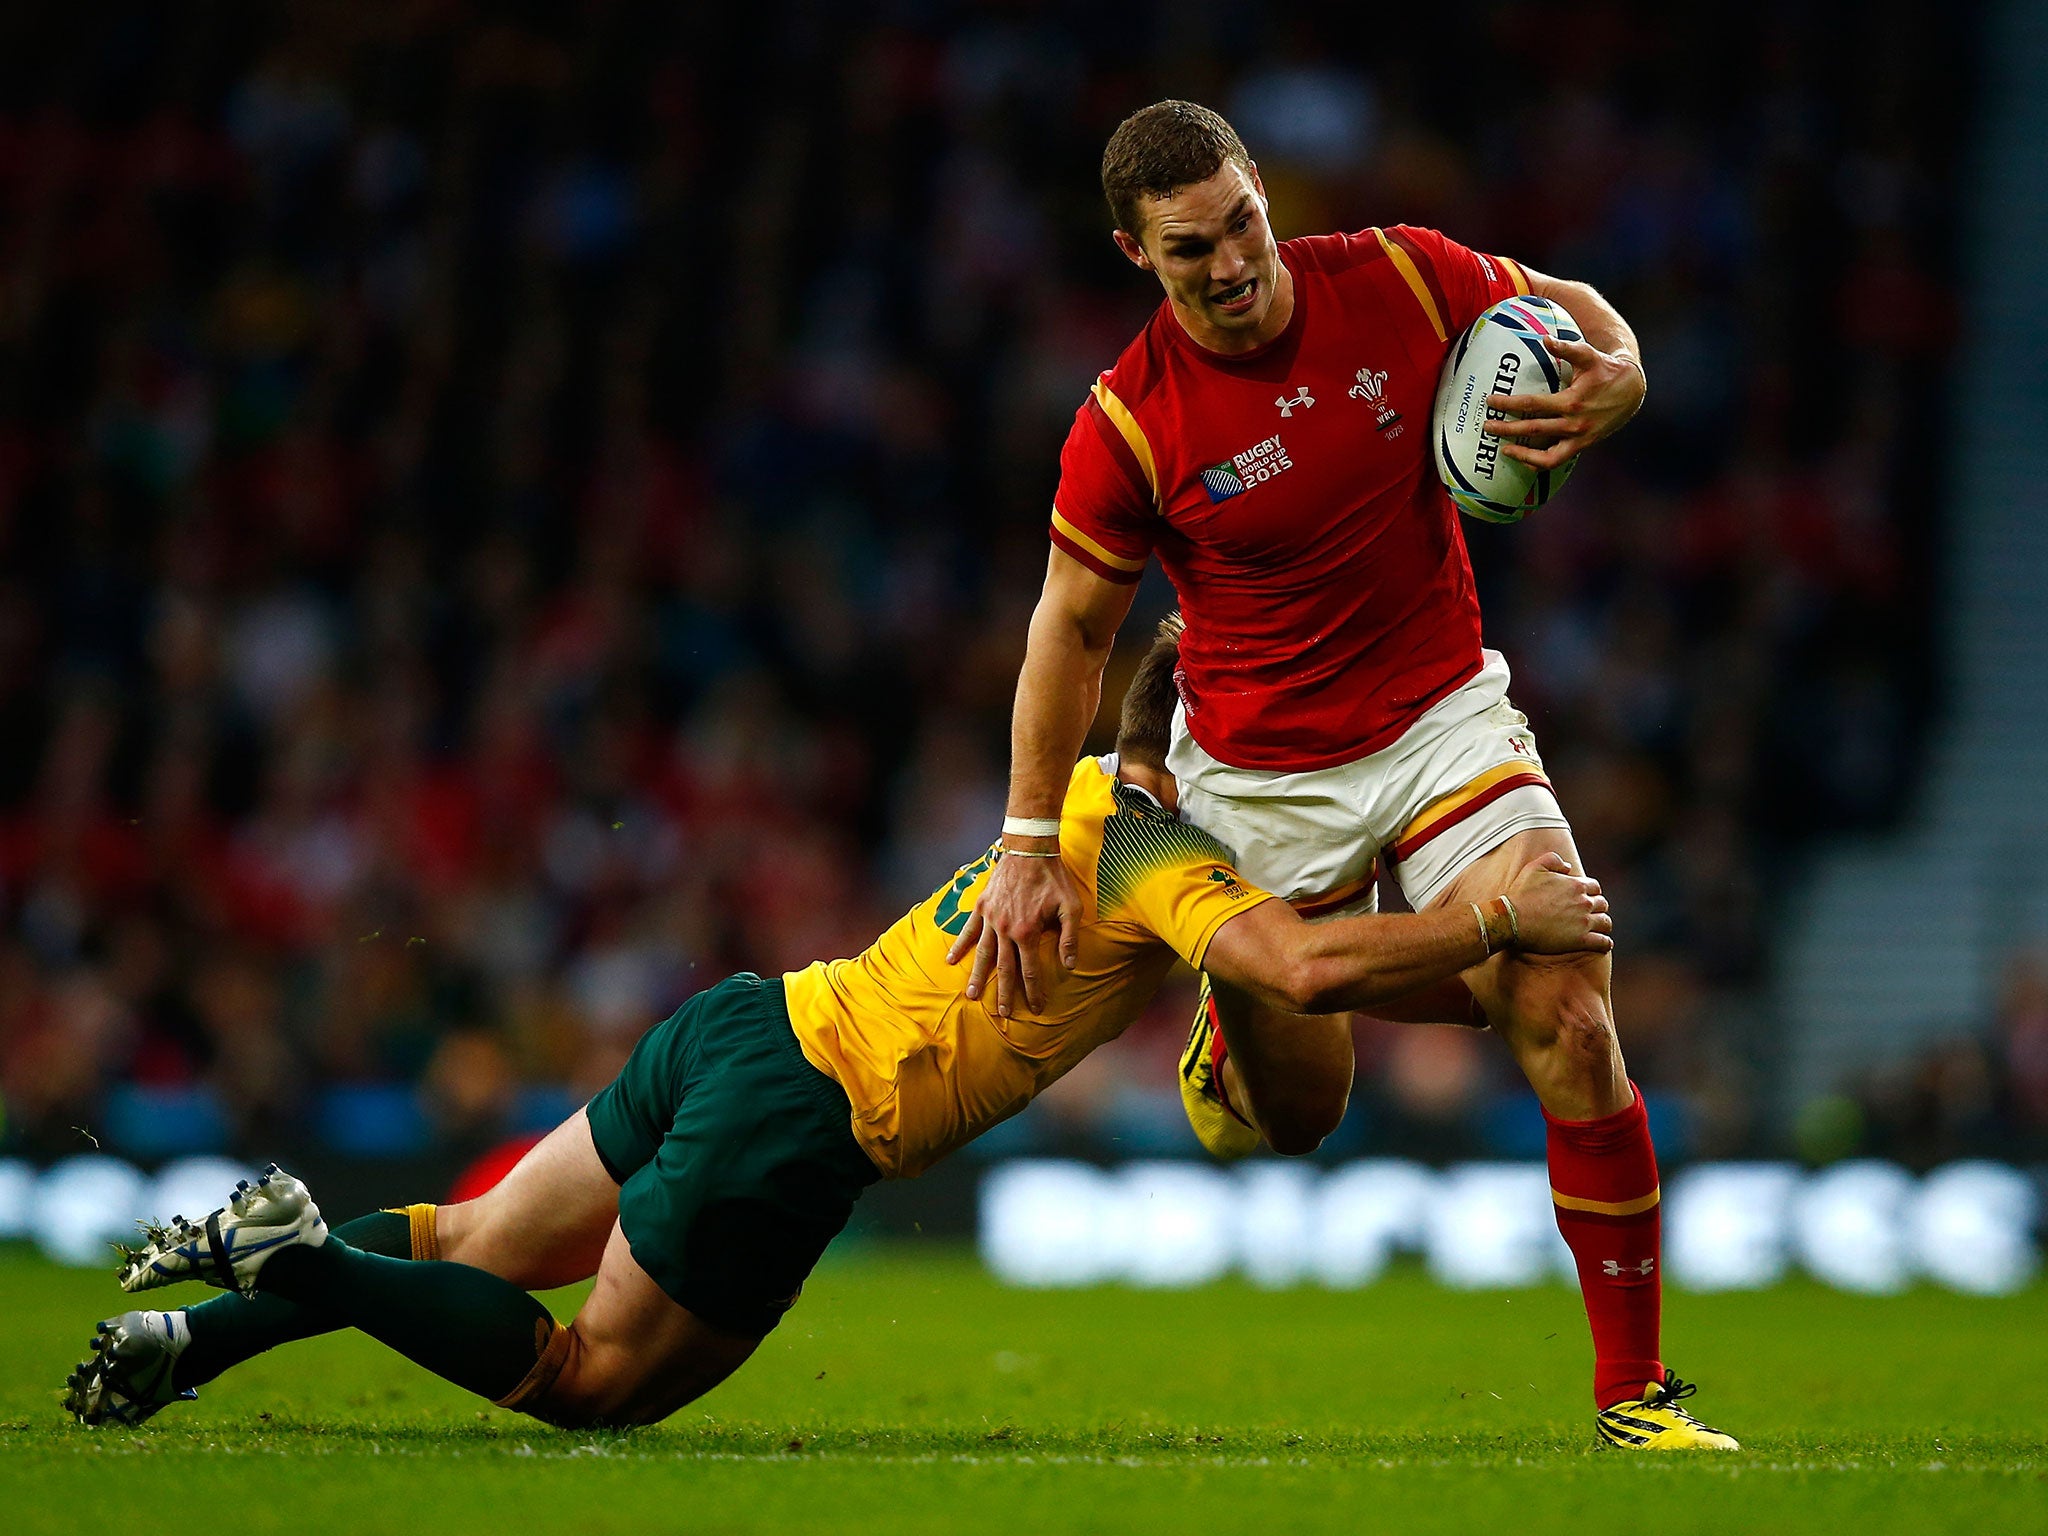 George North returns to the wing for Wales' clash with Australia